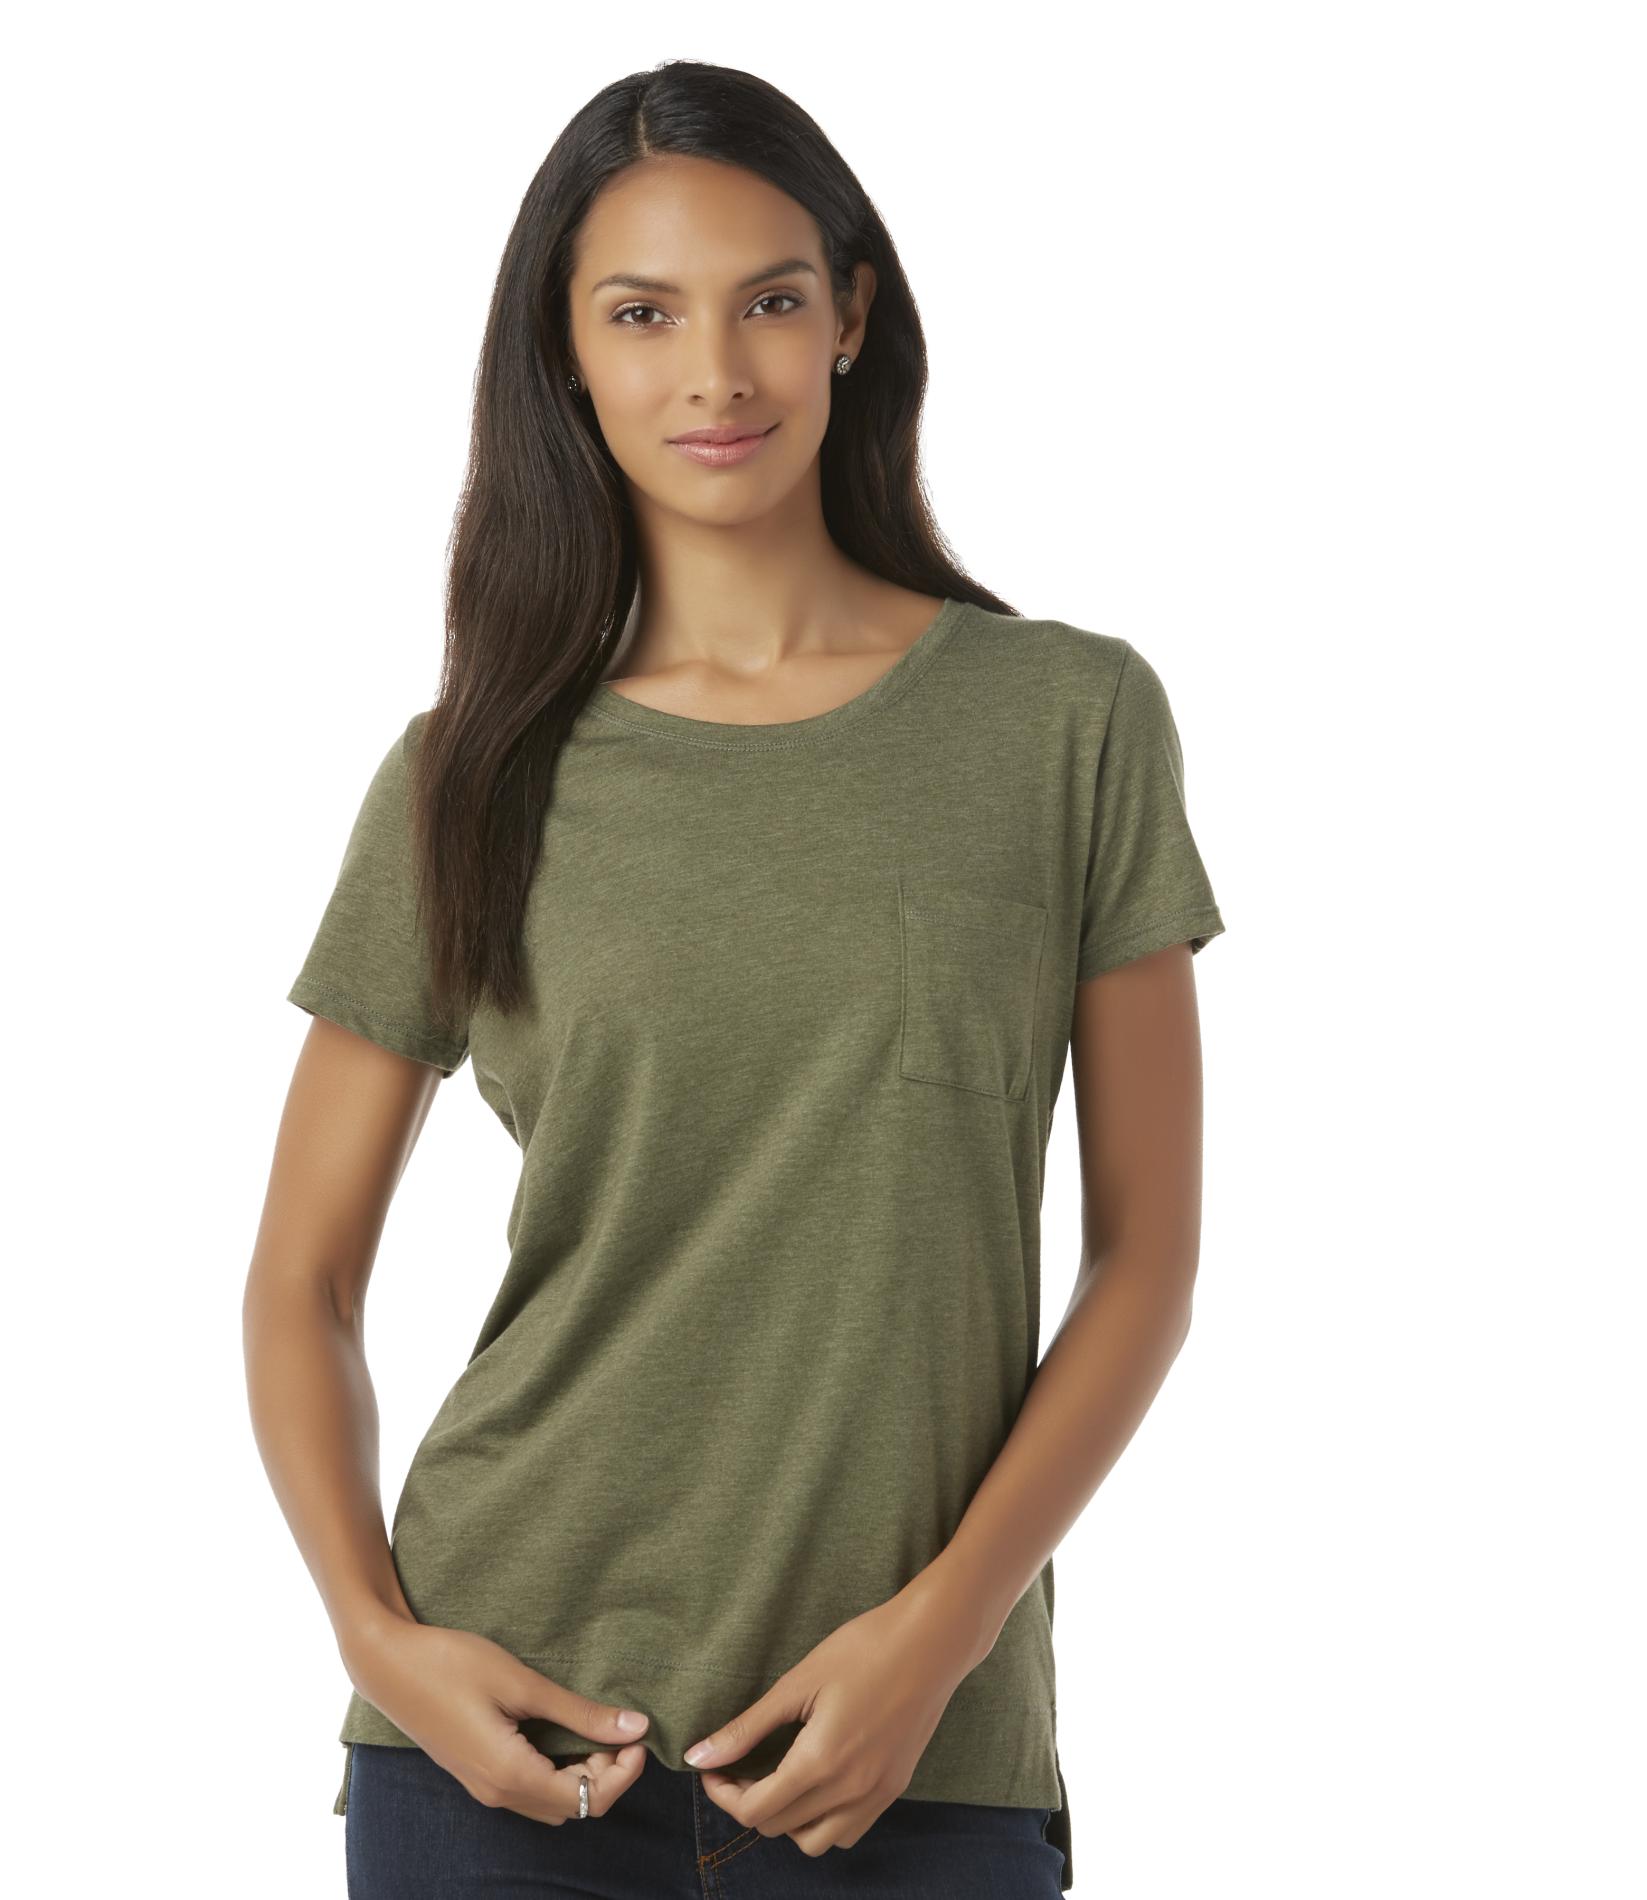 Simply Styled Women's Pocket T-Shirt